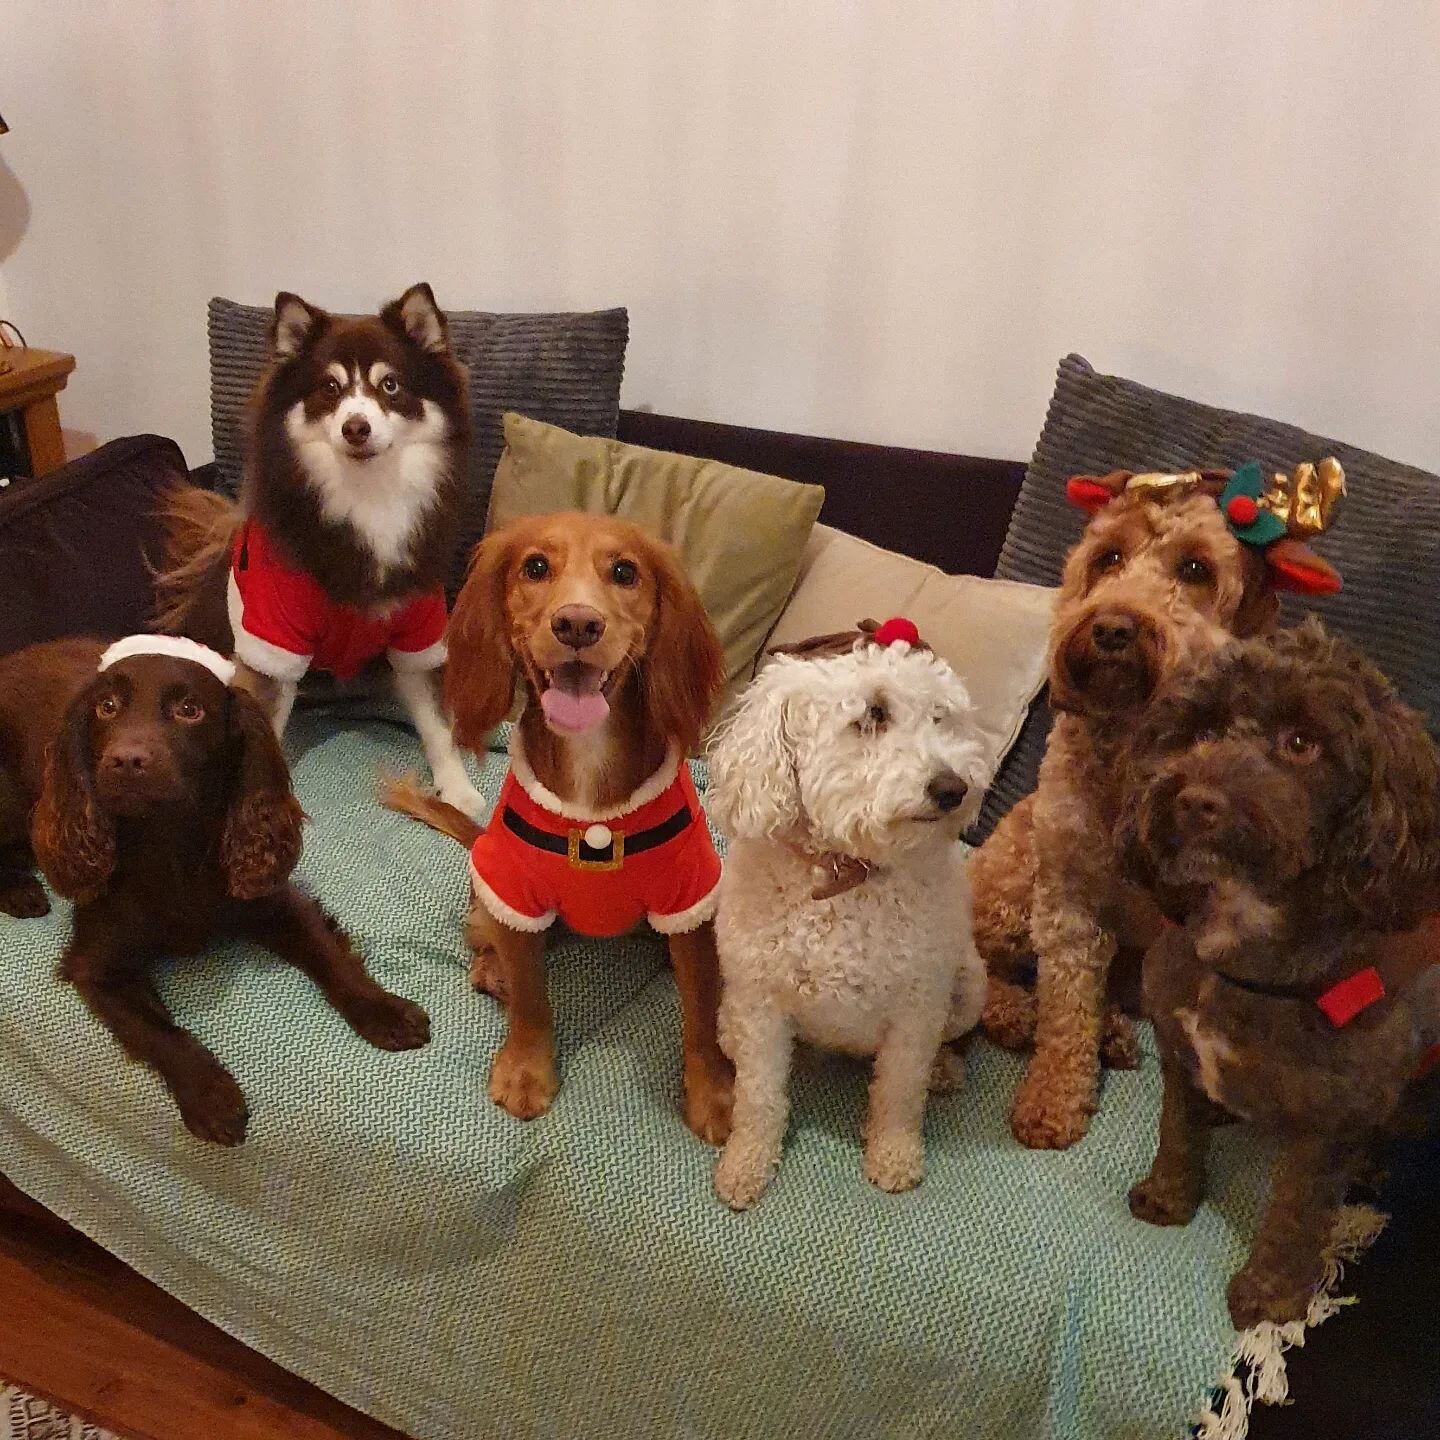 Santa Paws has come to town and he is ready to pawty 🎅🤘🐾 Wishing you a very Merry Christmas 💝 with love from the Fairy Family 🧚🏼&zwj;♀️🎄🐩🐕

#merrychristmas 🤗 #santapaws #doggychristmas 🎄 #christmaspawty 🎅 #santadog #dogsatchristmas